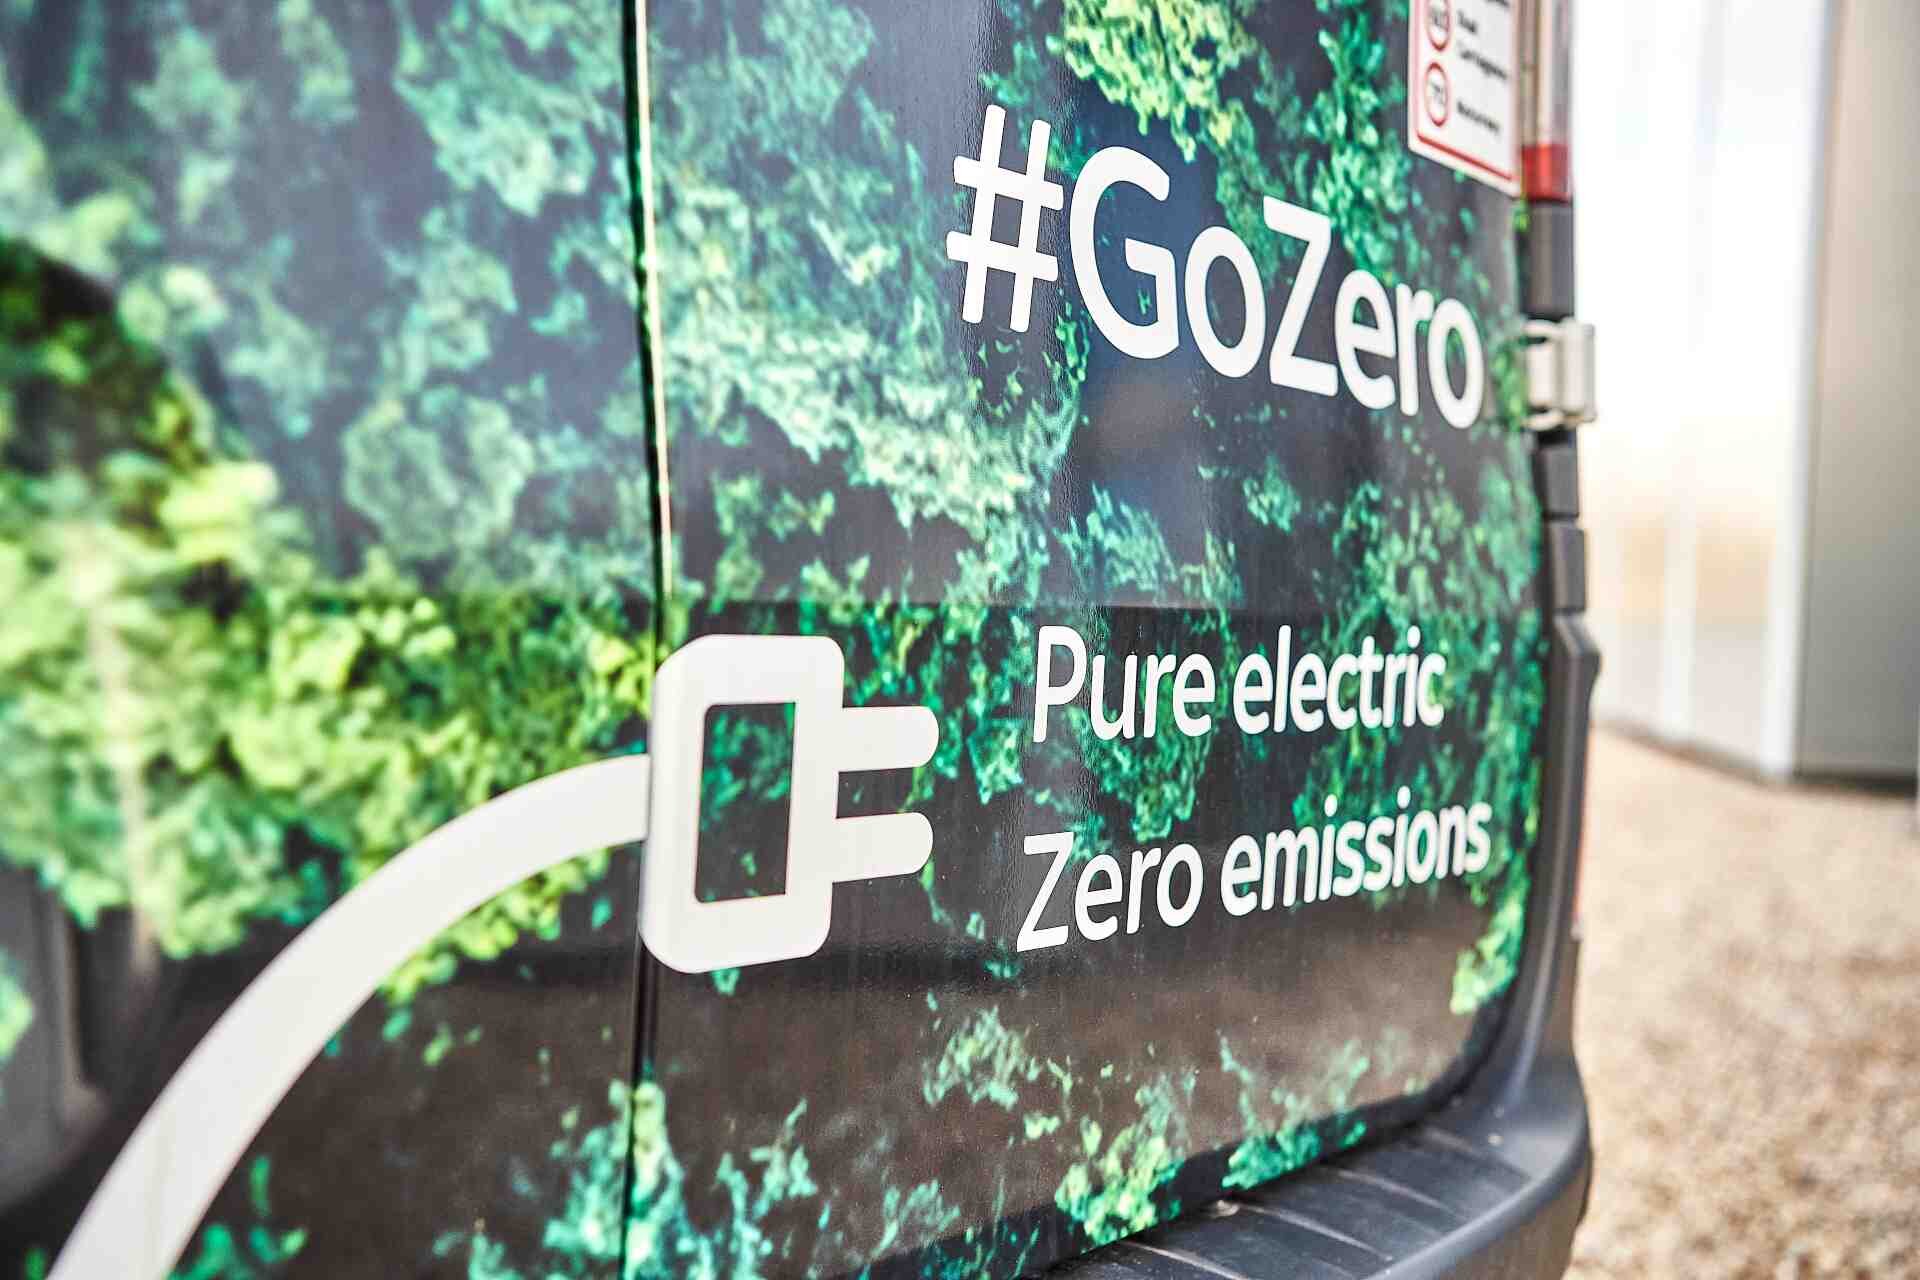 Did You Know? - Company van tax on zero emission vans will be reduced to 0% from April 2021. Drivers will also avoid free fuel tax, too. The Association of Fleet Professionals says greater communication of this benefit would help more fleets choose electric vans.